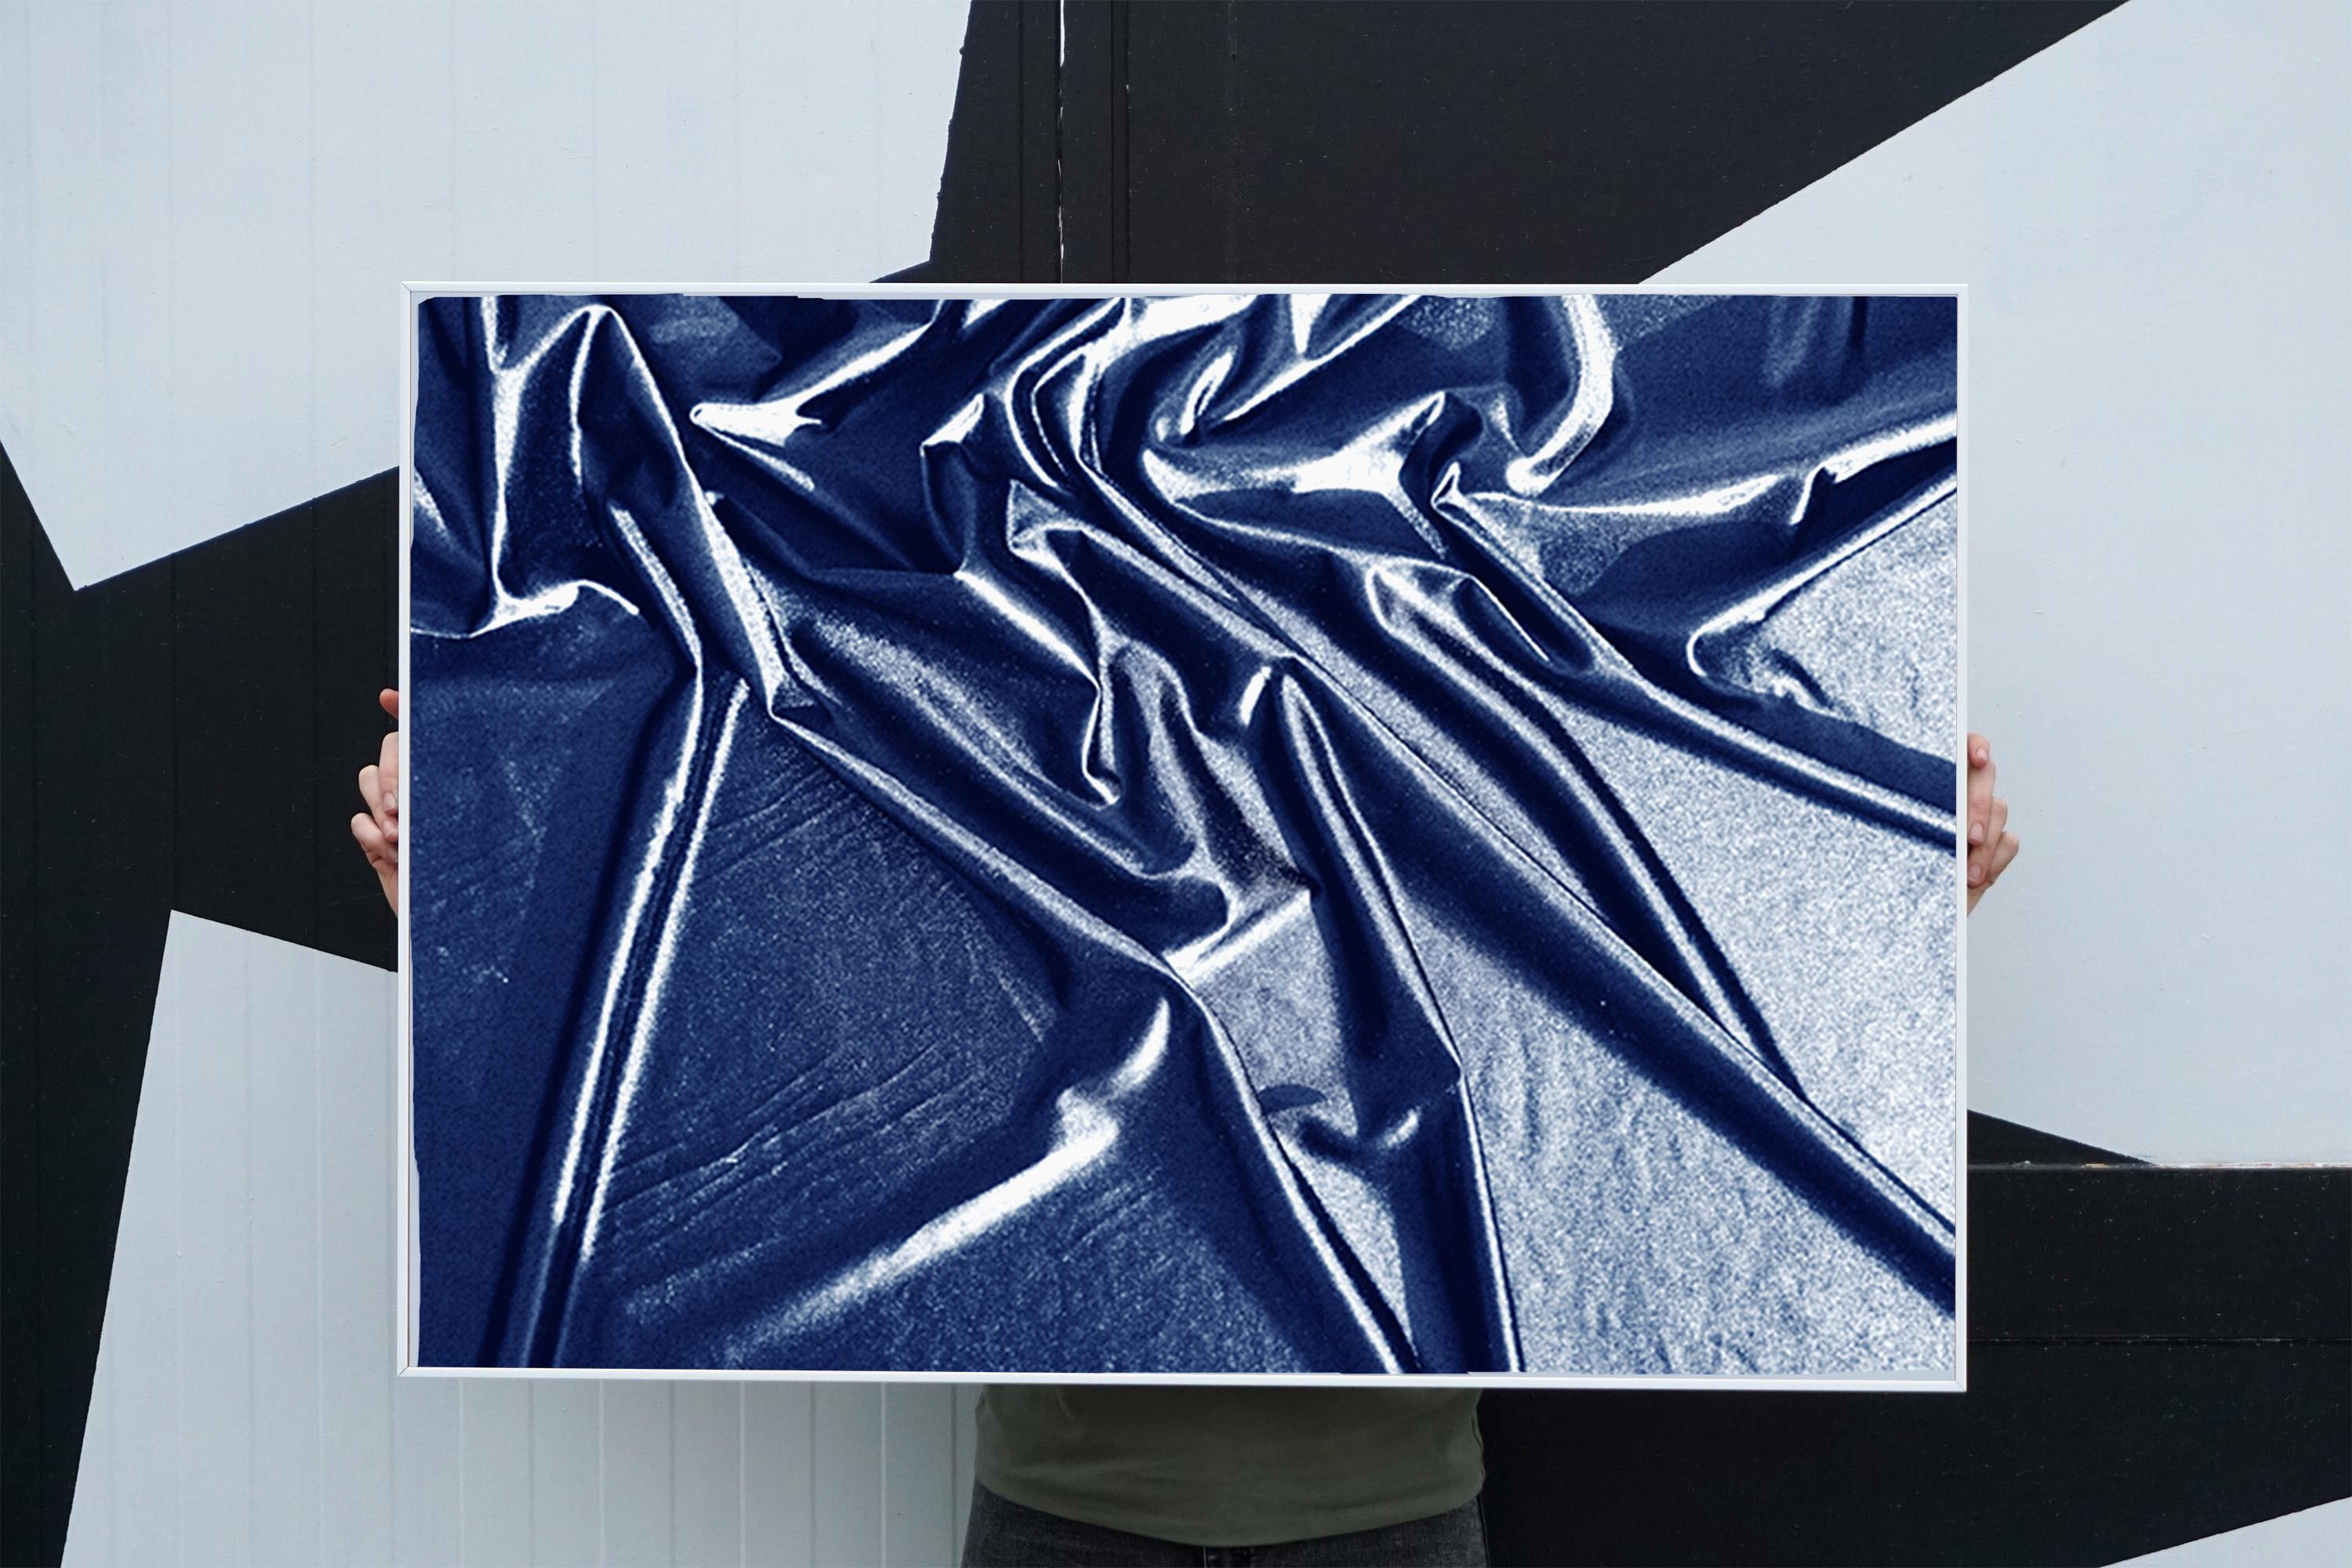 This is an exclusive handprinted limited edition cyanotype.

Details:
+ Title: Nocturnal Hint in Manhattan 
+ Year: 2020
+ Edition Size: 50
+ Stamped and Certificate of Authenticity provided
+ Measurements : 70x100 cm (28x 40 in.), a standard frame